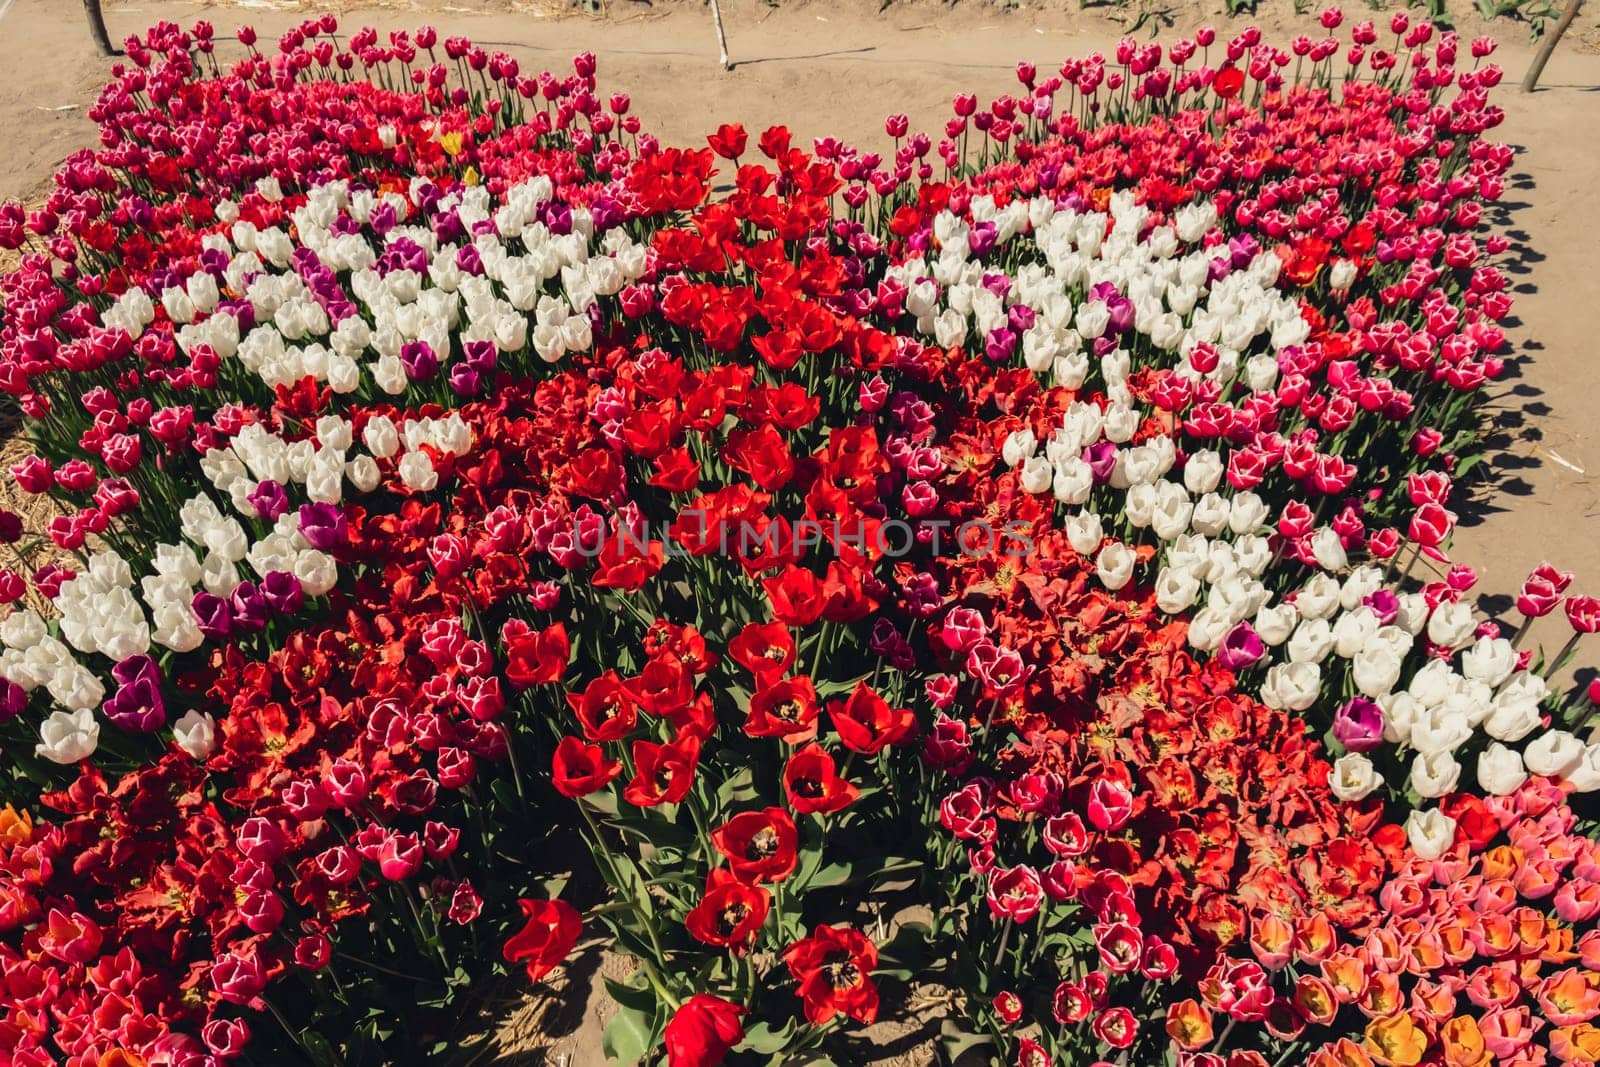 Blooming floral park in shape of tied bow. Colorful Tulip flowers blooming in the garden field landscape. Beautiful spring garden with many red tulips outdoors. Stripped tulips growing in flourish meadow sunny day Keukenhof. Natural floral pattern by anna_stasiia